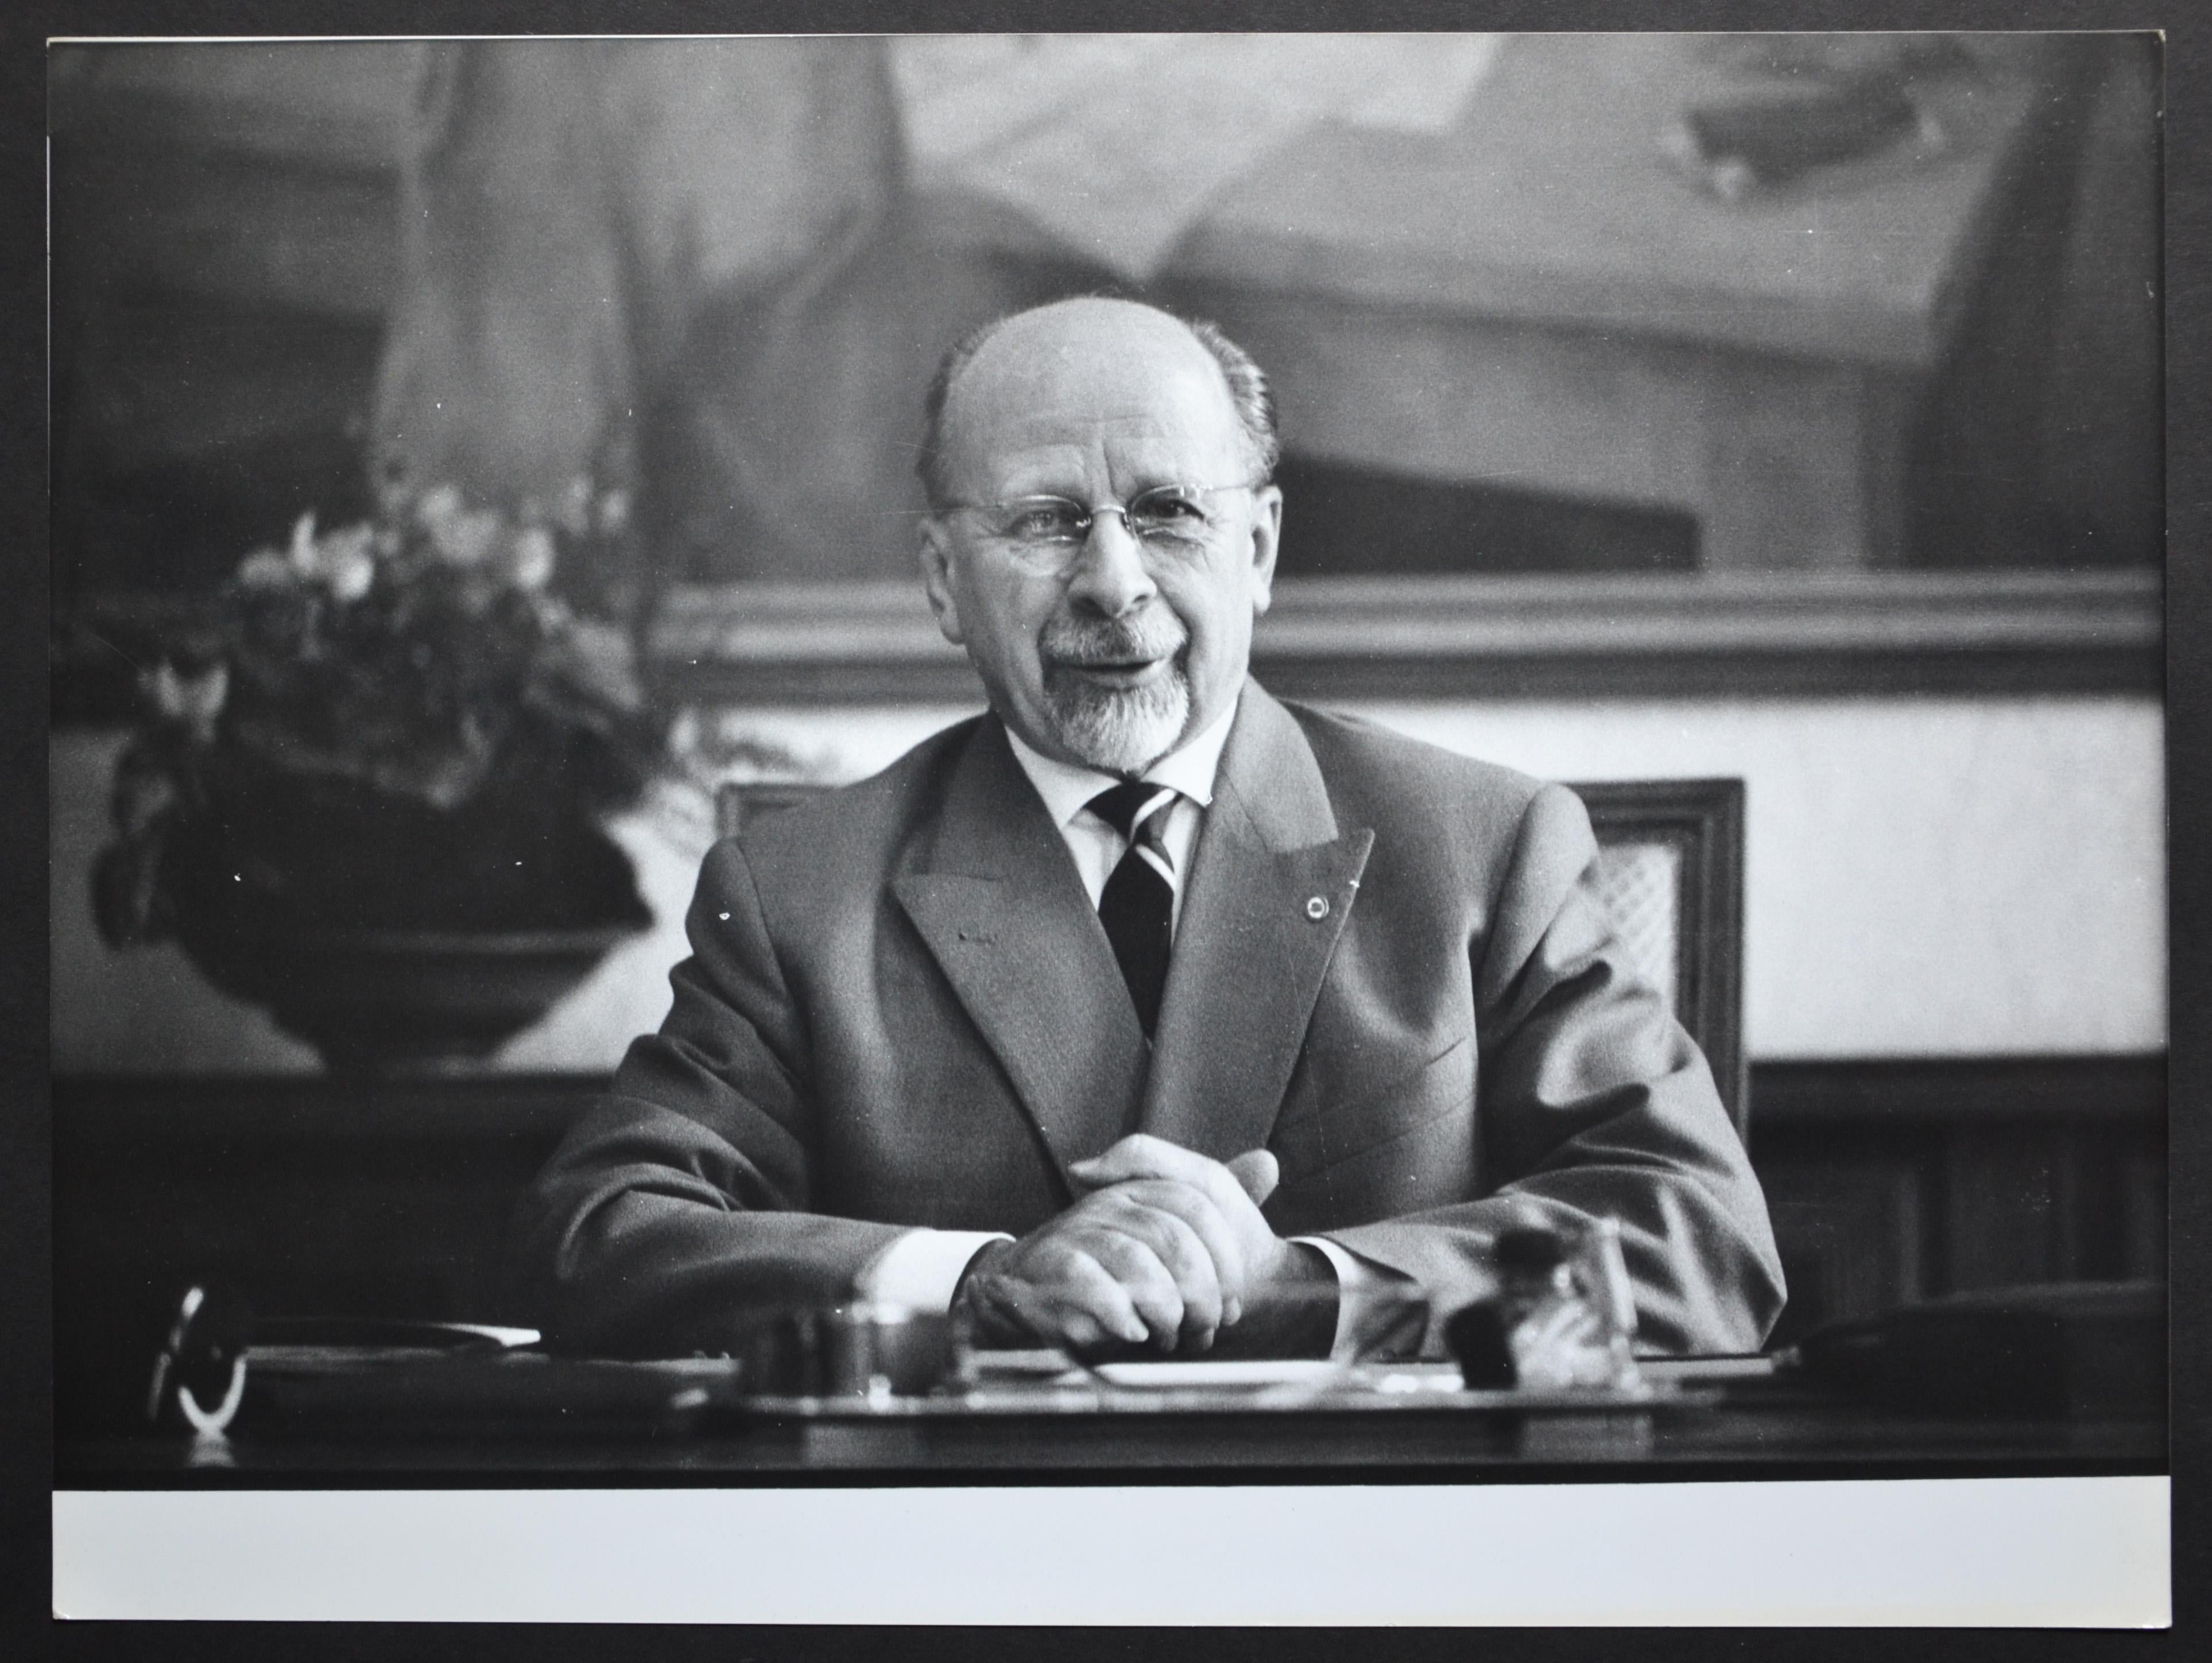 Rolf Gillhausen Black and White Photograph - Walter Ulbricht (1893-1973) posing at a desk, East Germany late 1950s.